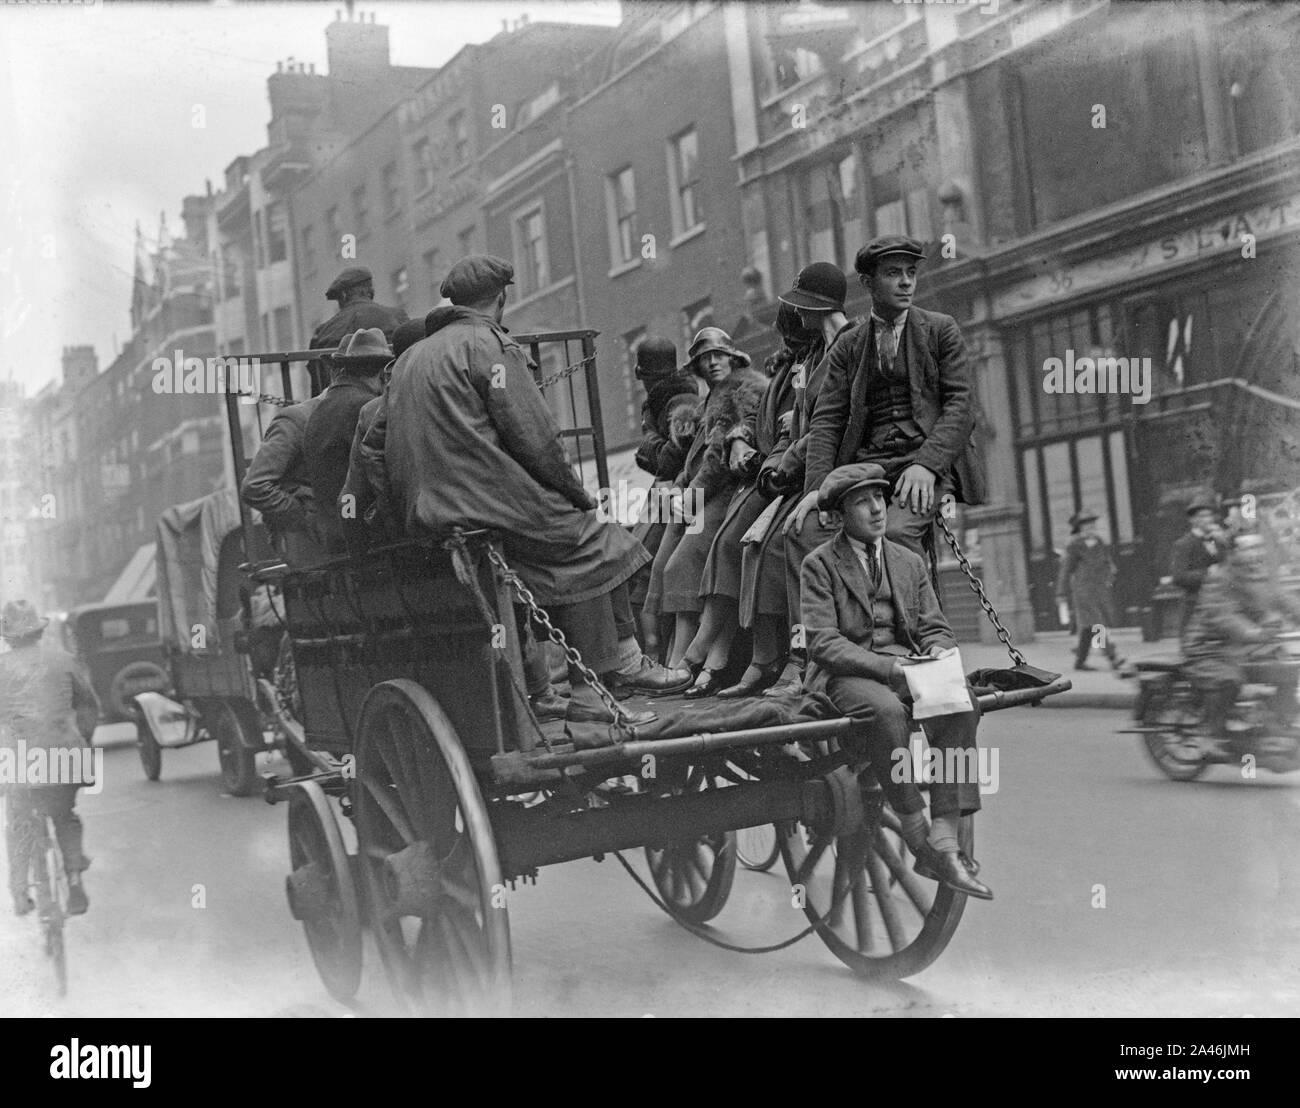 4th May 1926, London, England. As the General Strike begins in the United Kingdom, many public services are disrupted. Many people are unable to use the buses, so would travel around the city any way they could. The photo shows people in the back of a horse and cart. Stock Photo